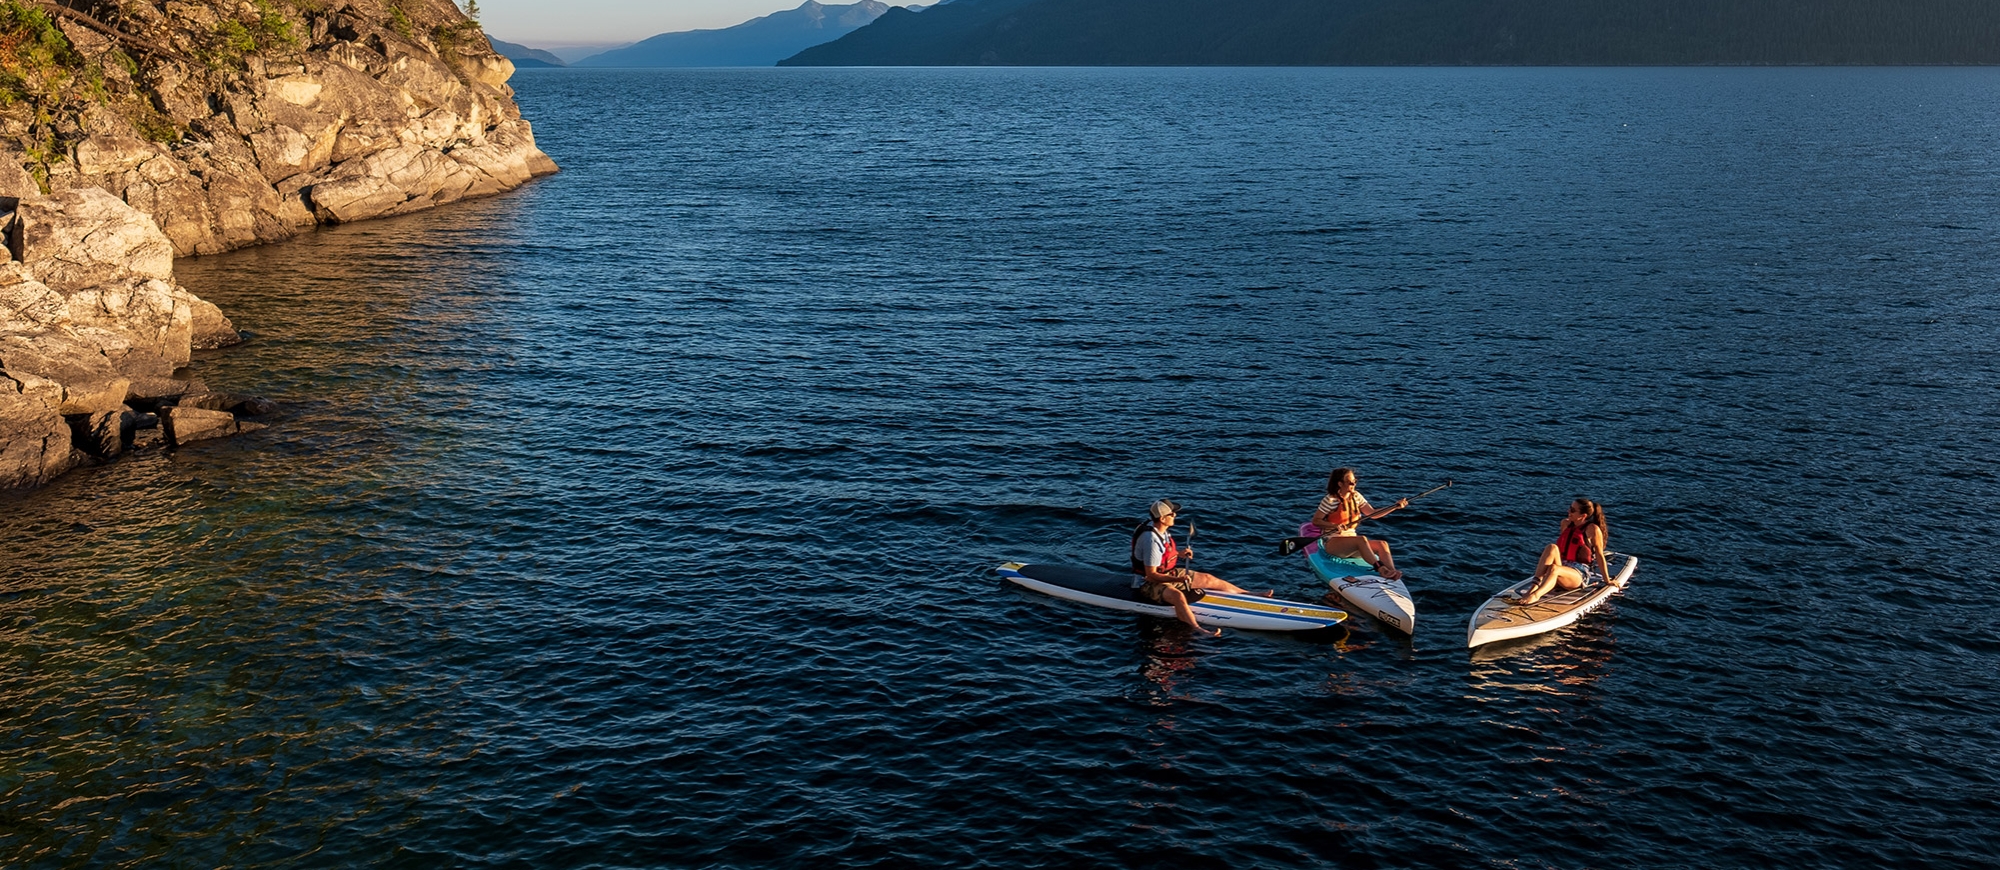 Three paddle boarders sitting on their boards facing each other on Kootenay Lake, BC